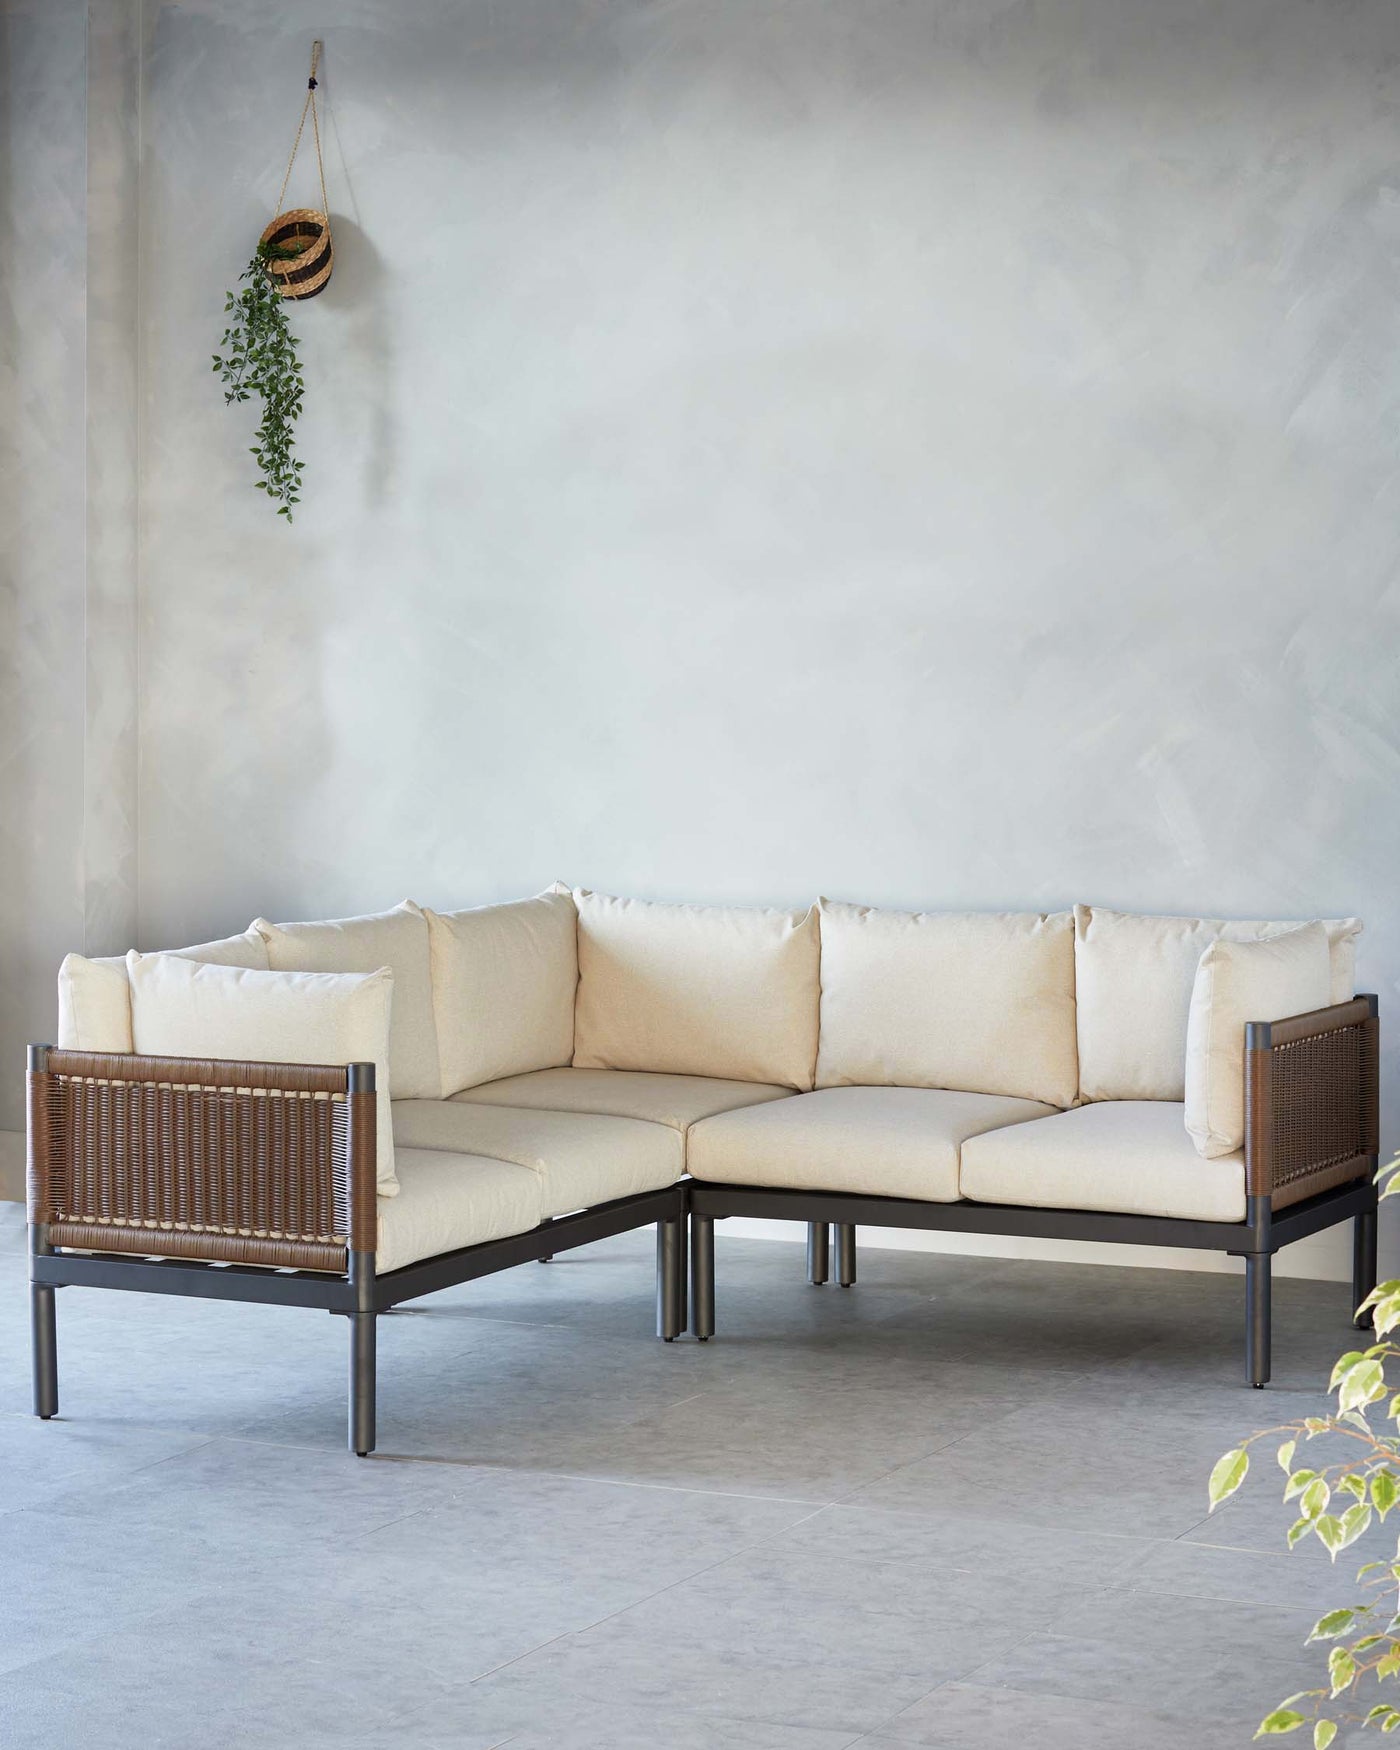 An L-shaped modular sofa with a minimalist design, featuring a sleek black metal frame and vertical wooden slats on the armrests. The sofa is upholstered with light beige cushions and accompanied by plush back pillows in a matching tone.